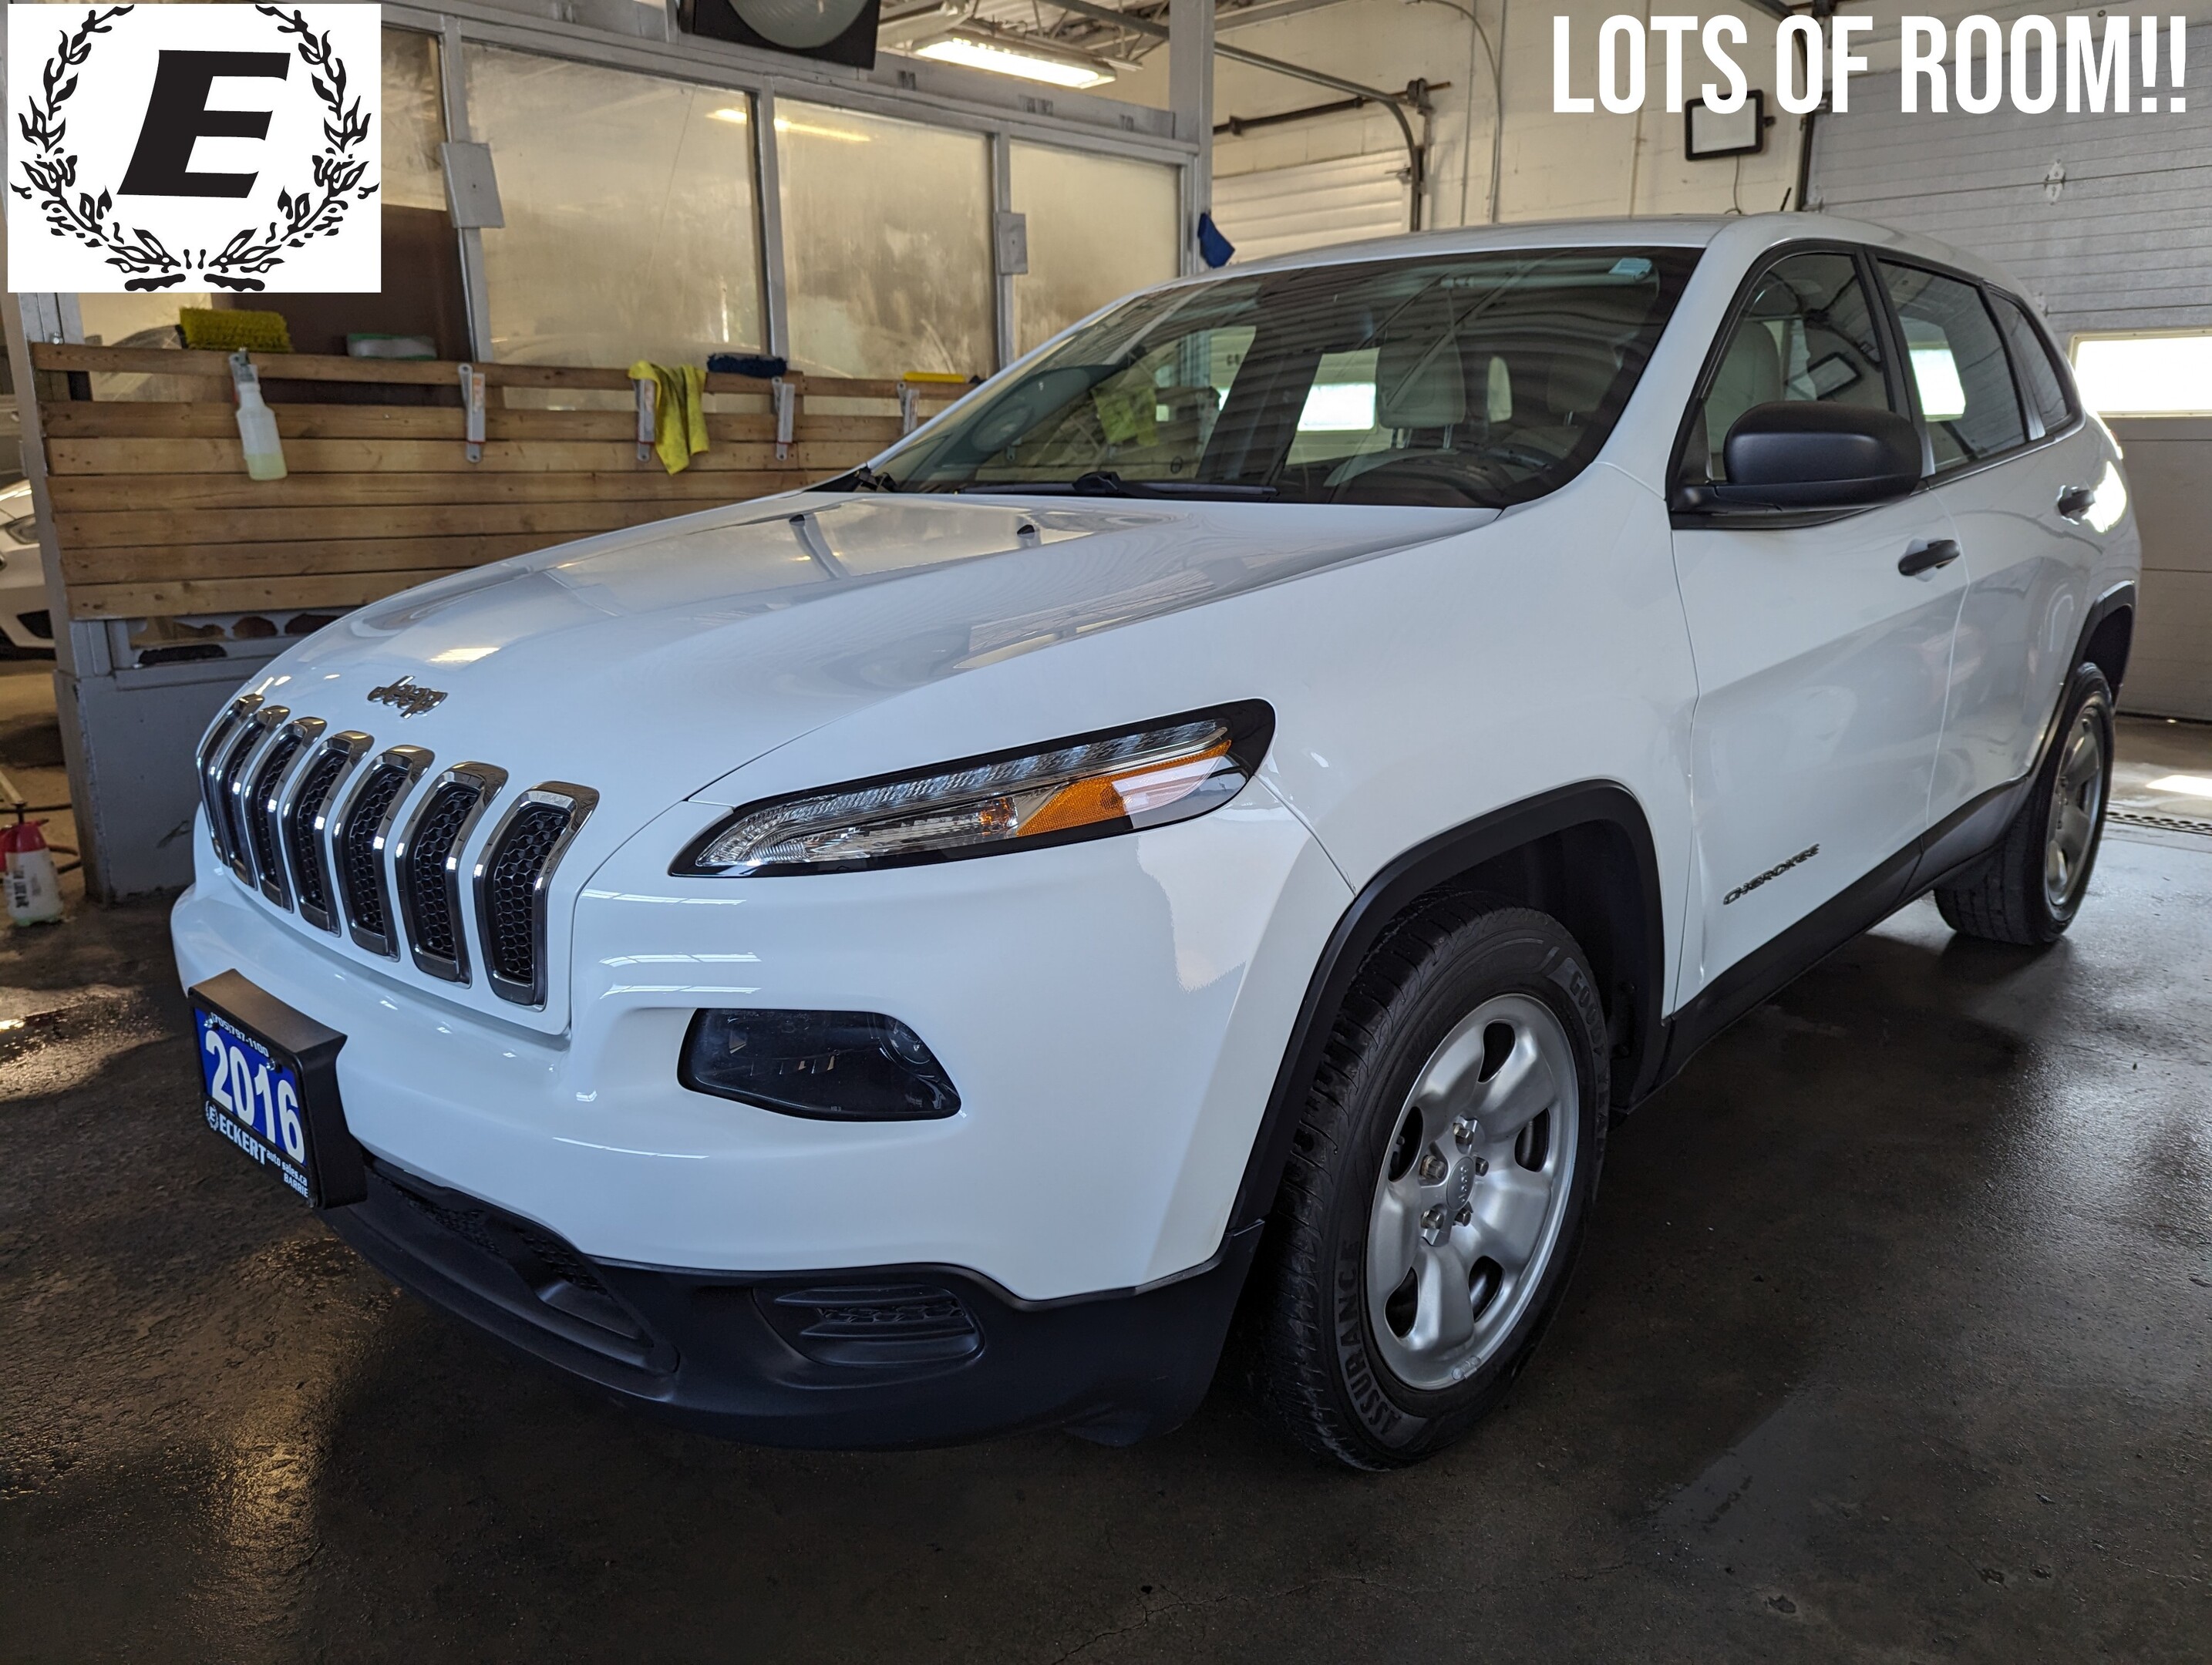 2016 Jeep Cherokee FWD 4dr Sport  LOTS OF ROOM!!